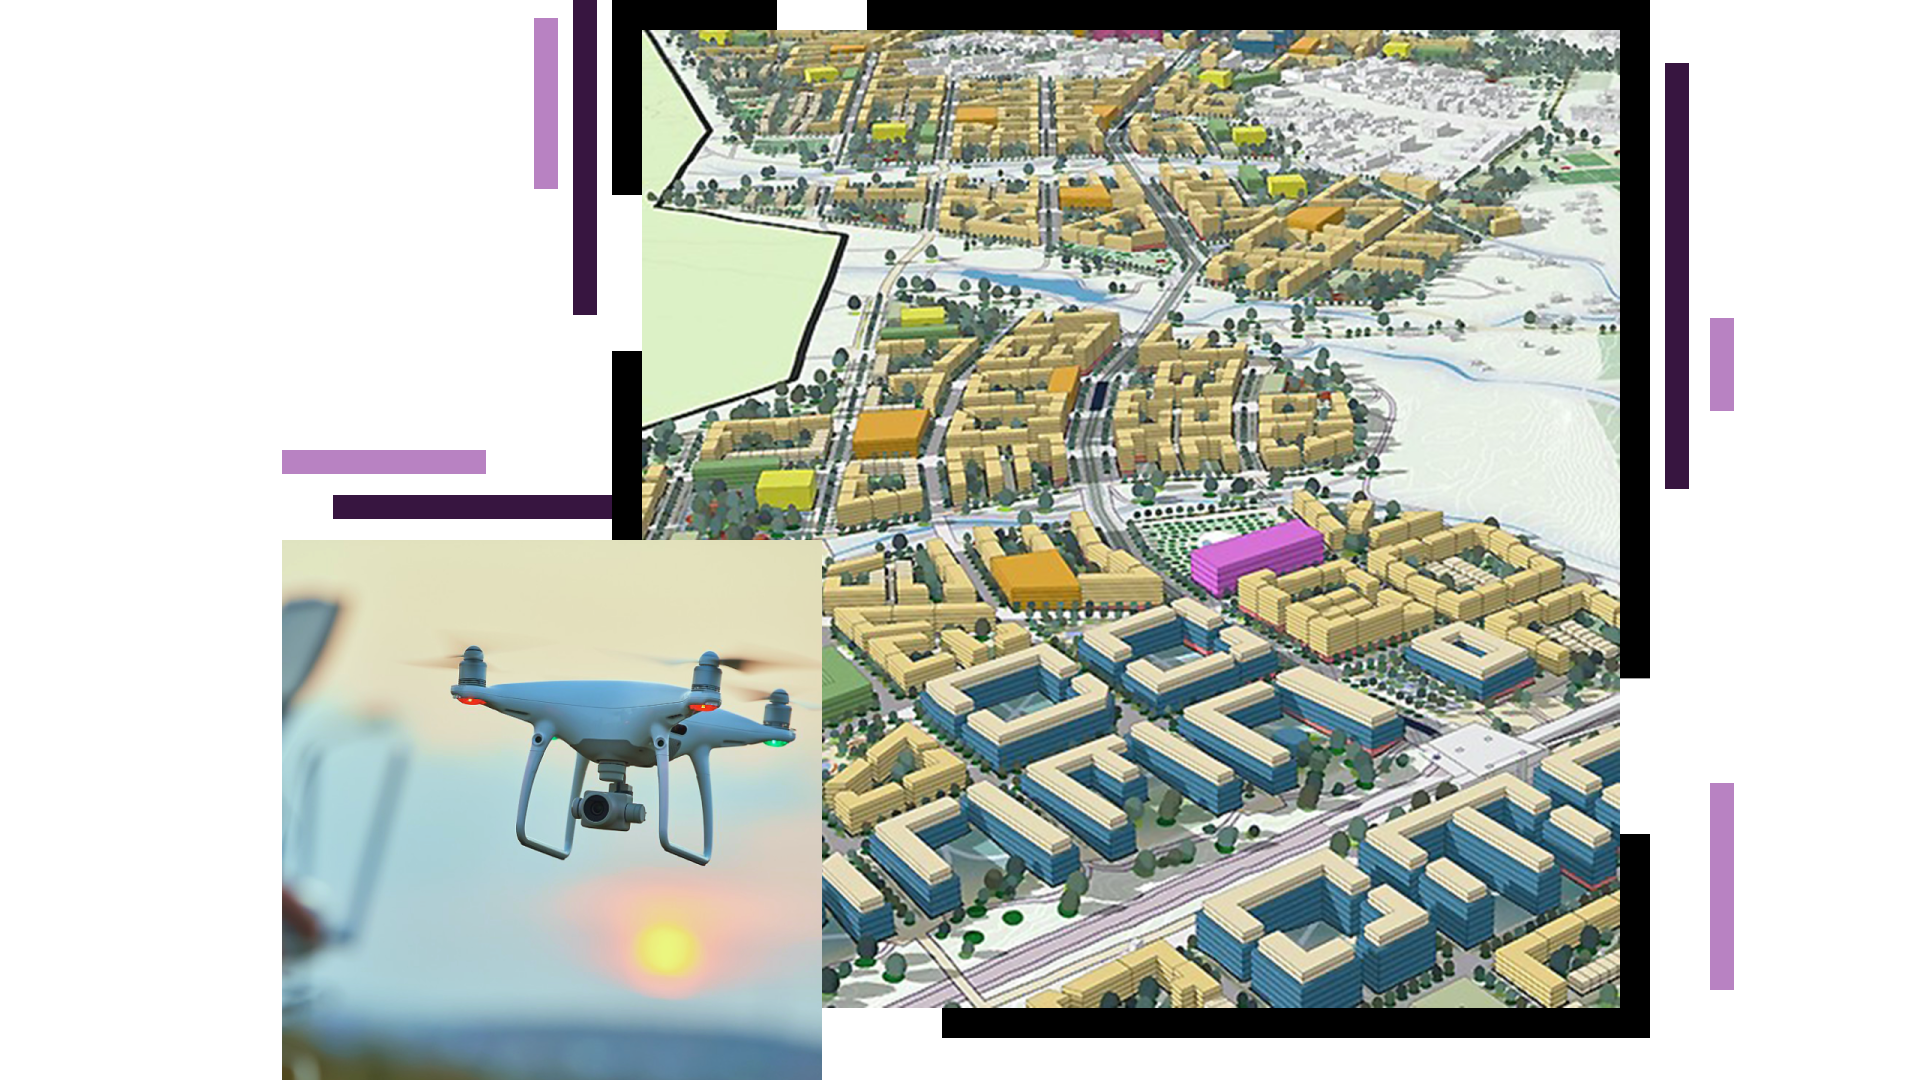 A 3D model of a sprawling city with buildings shaded yellow and blue, overlaid with a closeup photo of a large white drone in mid-flight